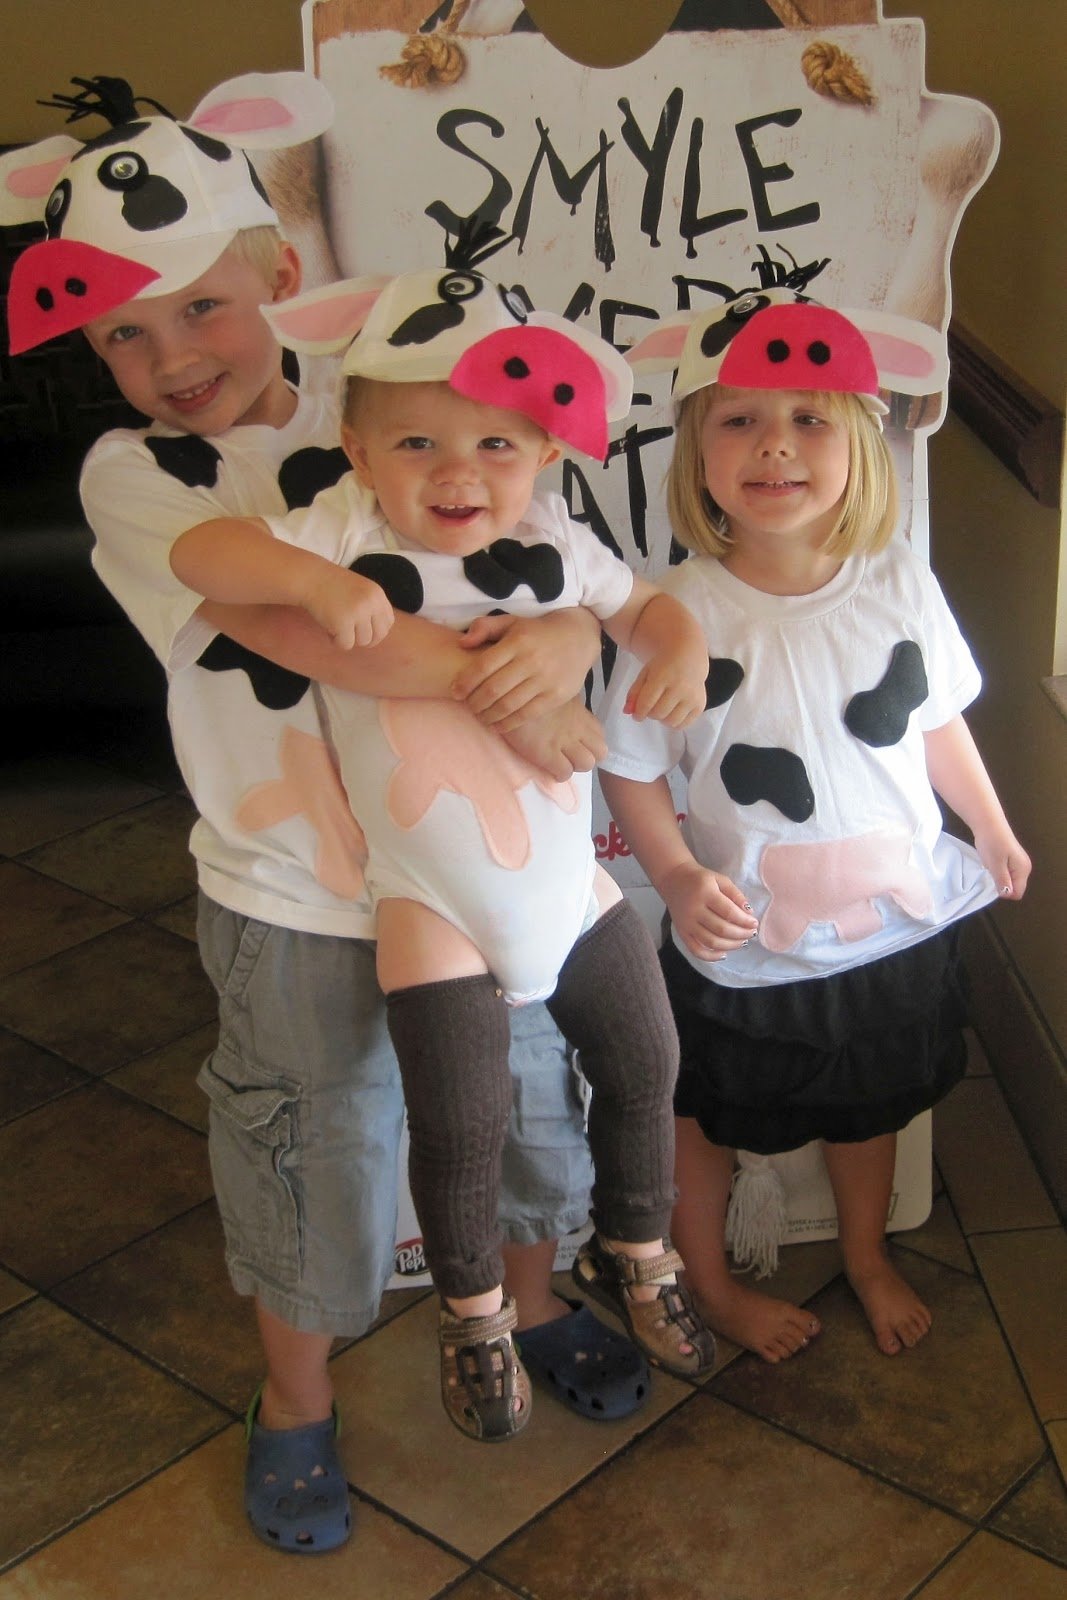 10 Awesome Good Homemade Halloween Costume Ideas the treasure hunts cow day at chick fil a cow costume adventures 2022